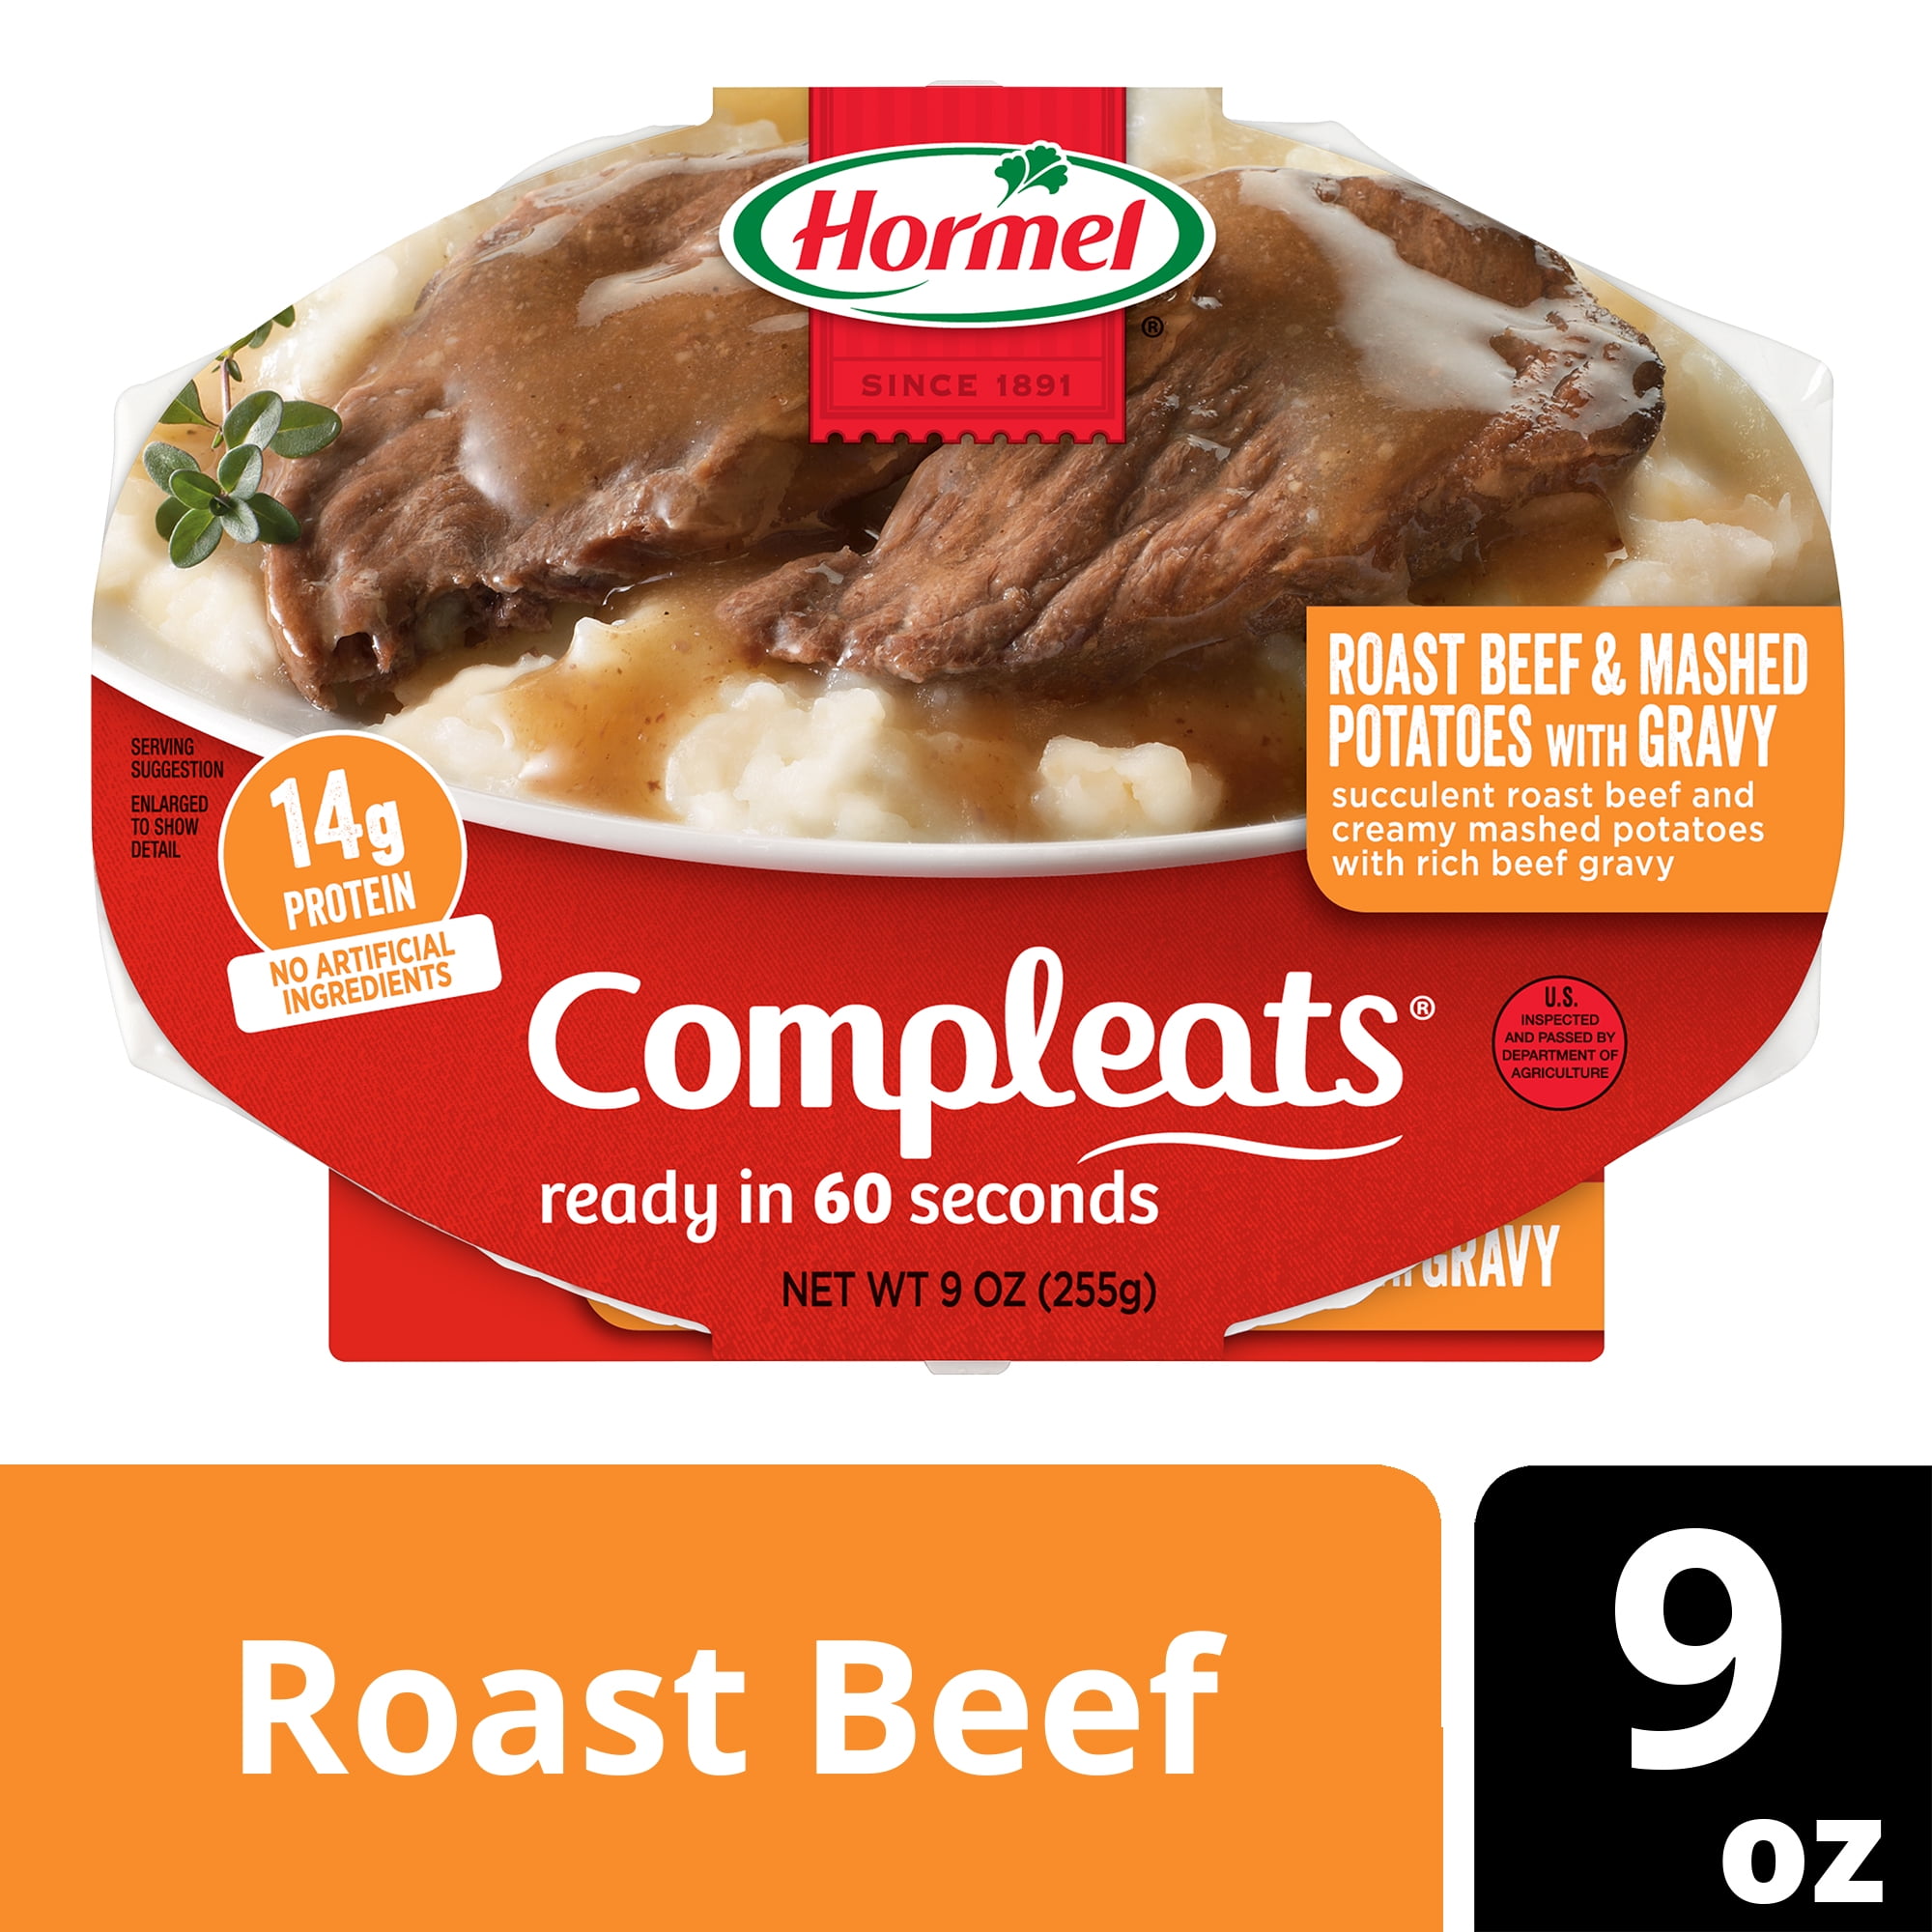 HORMEL COMPLEATS Roast Beef & Mashed Potatoes With Gravy Microwave Tray, 9 oz